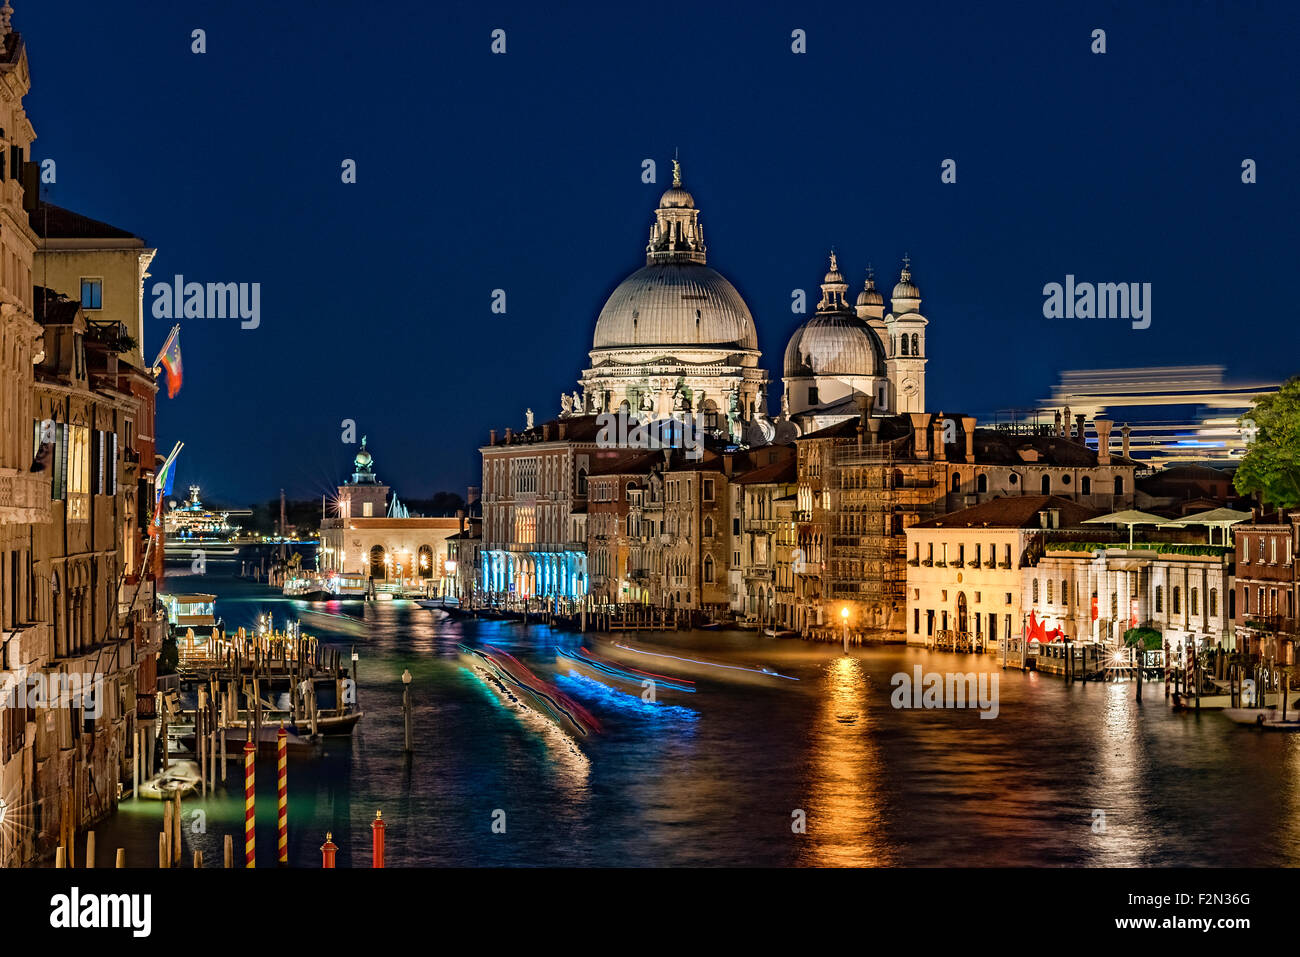 View of the Grand Canal at night, Venice, Italy Stock Photo